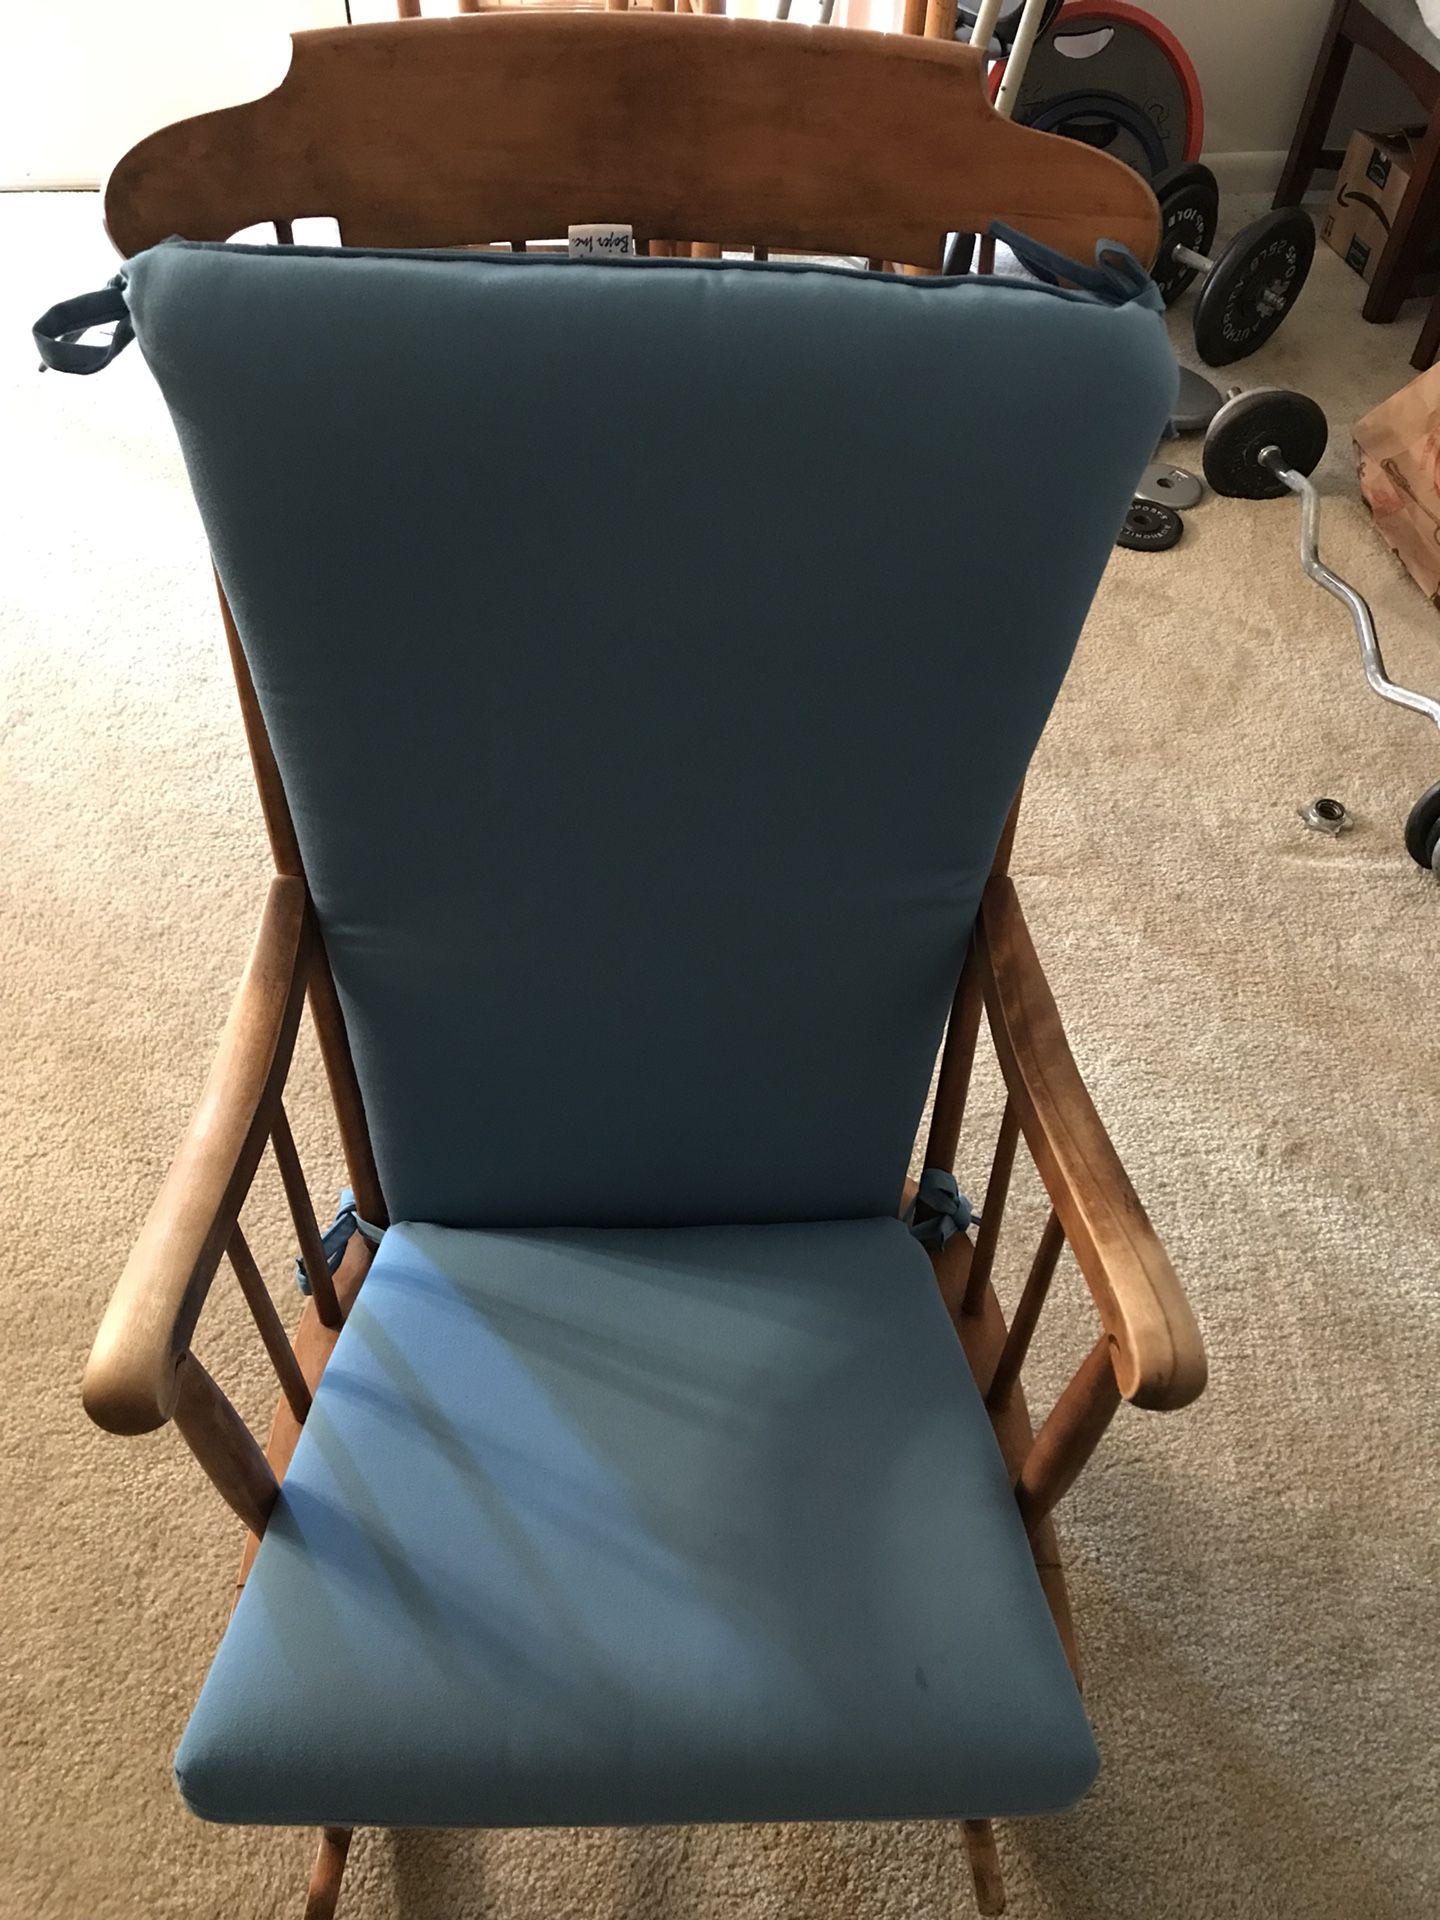 Rocking chair with cushion